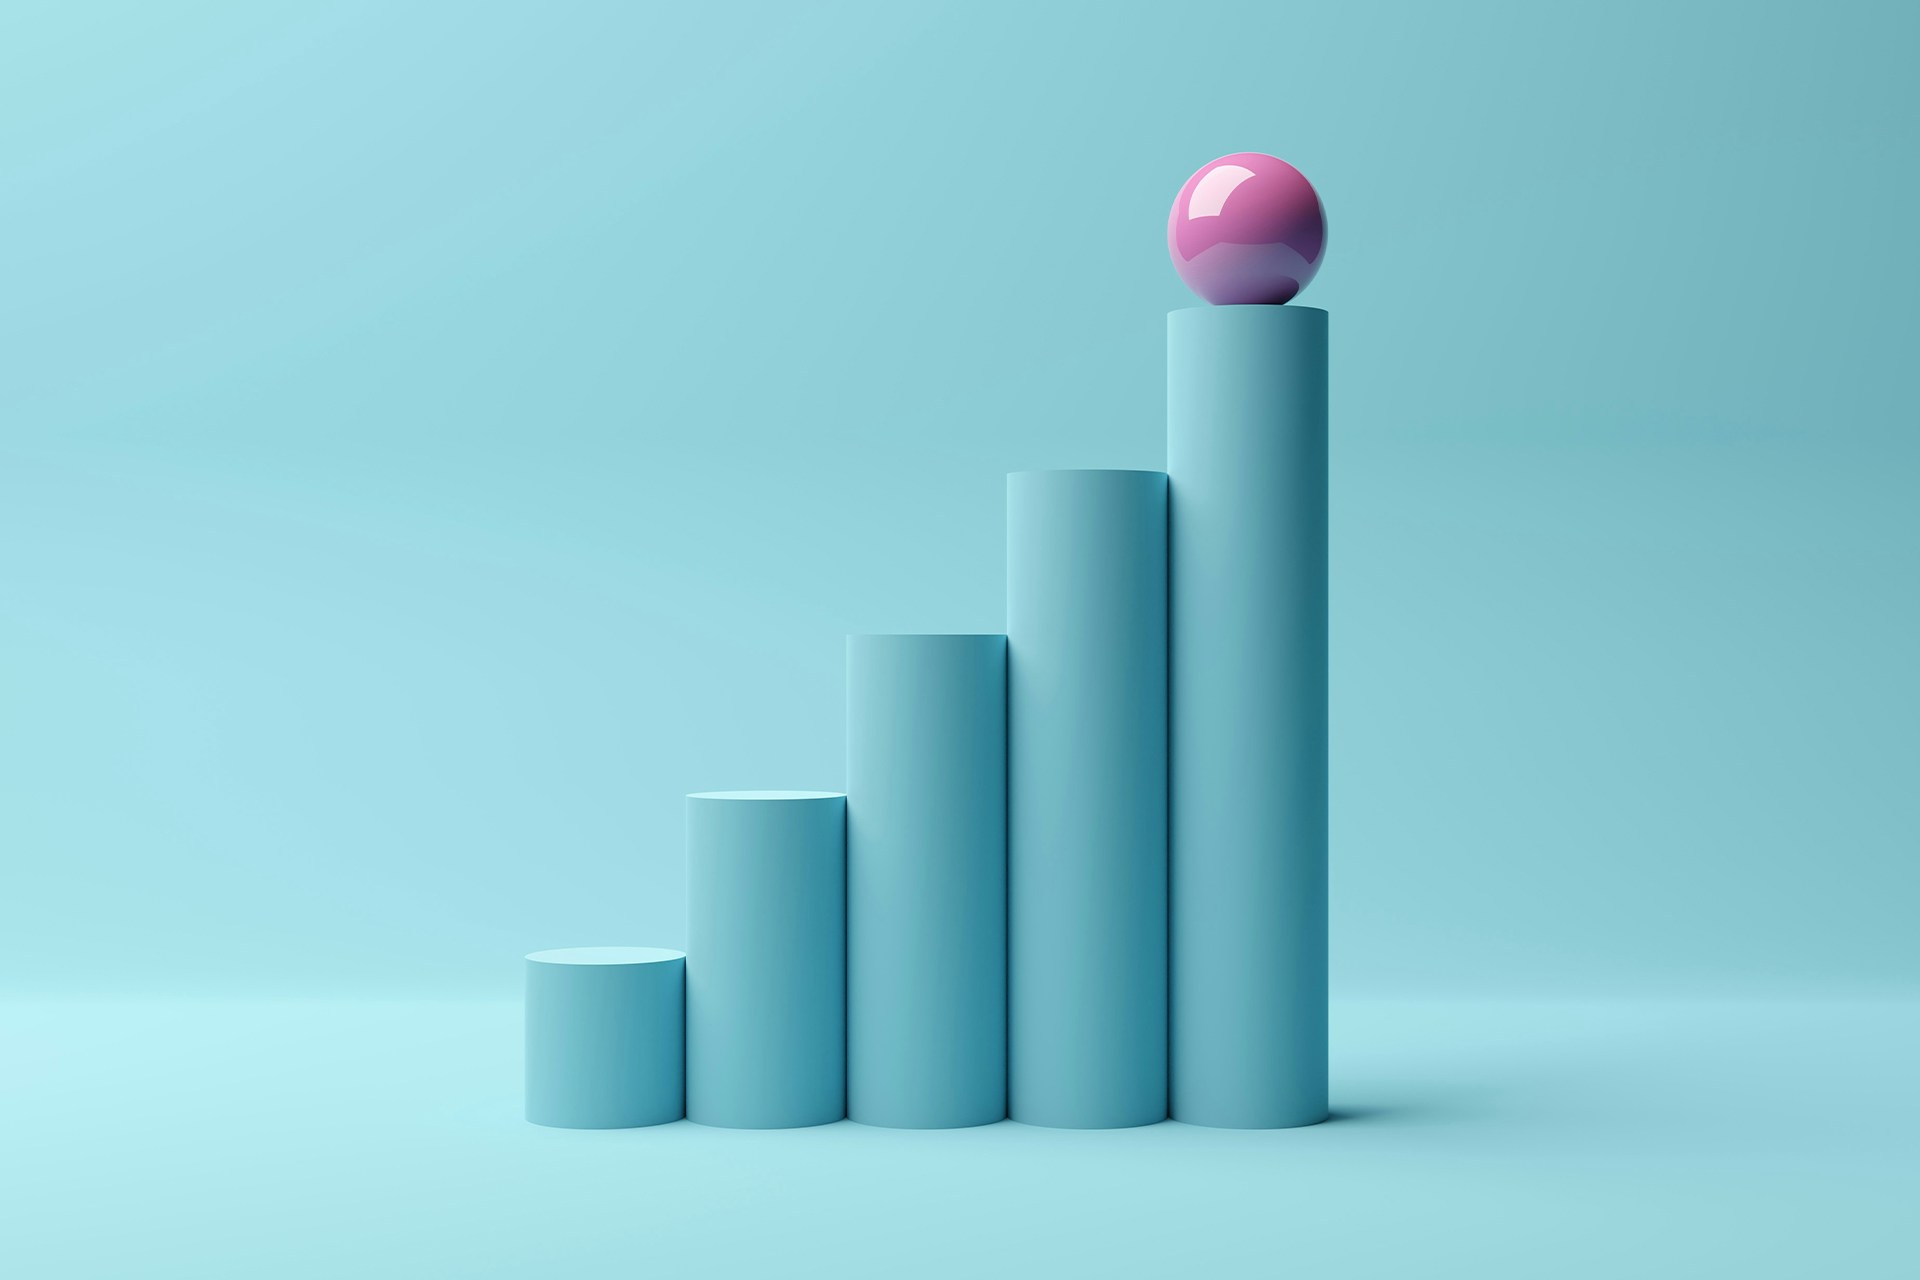 An image from a blog on social media reporting of a series of teal cylinders stacked in ascending order to form a graph. There is a pink sphere atop the tallest teal cylinder.